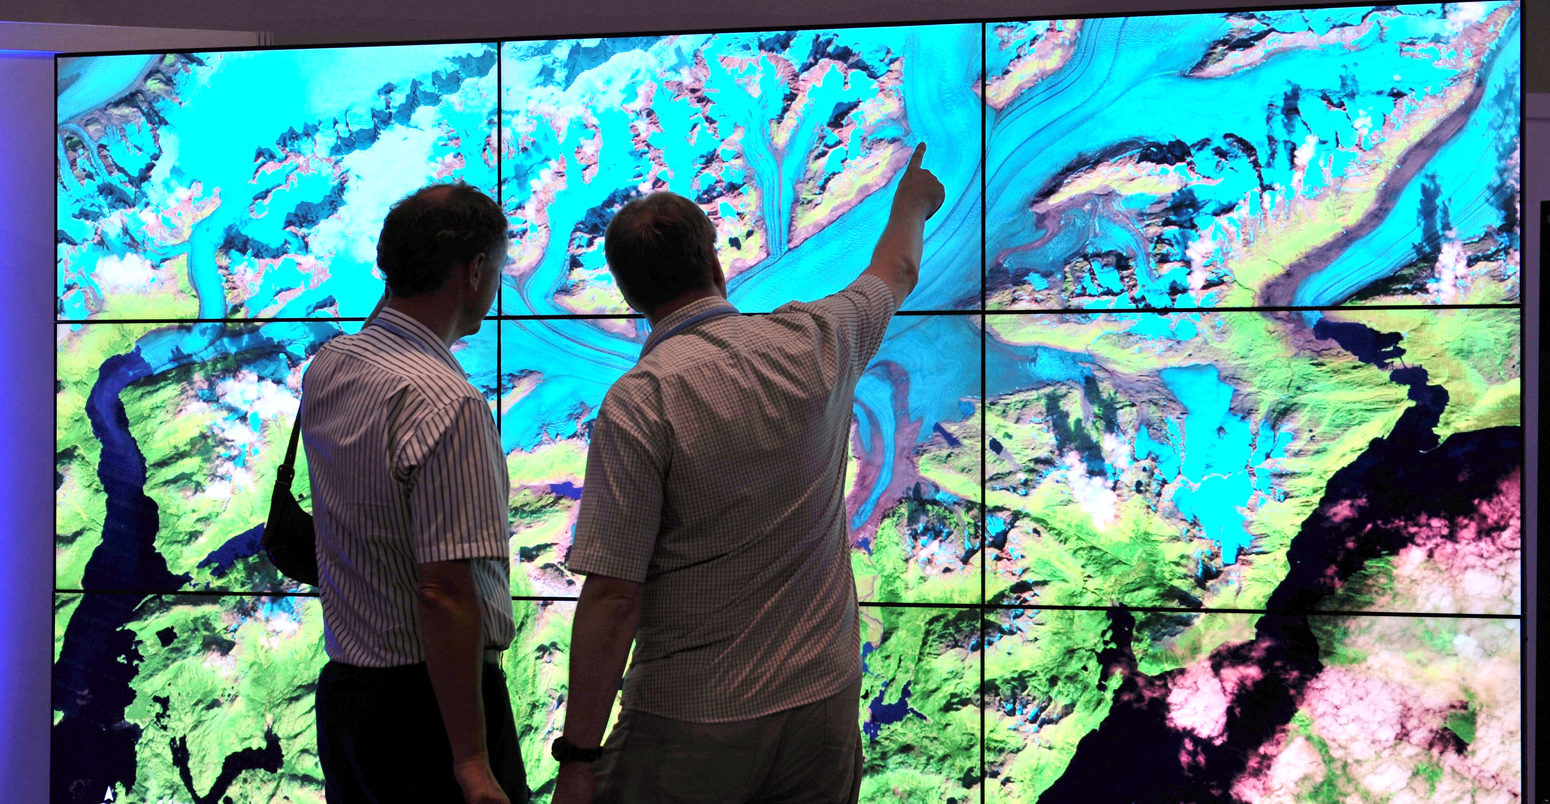 European space scientists view NASA data visualizations at the US Center during COP 18 Doha